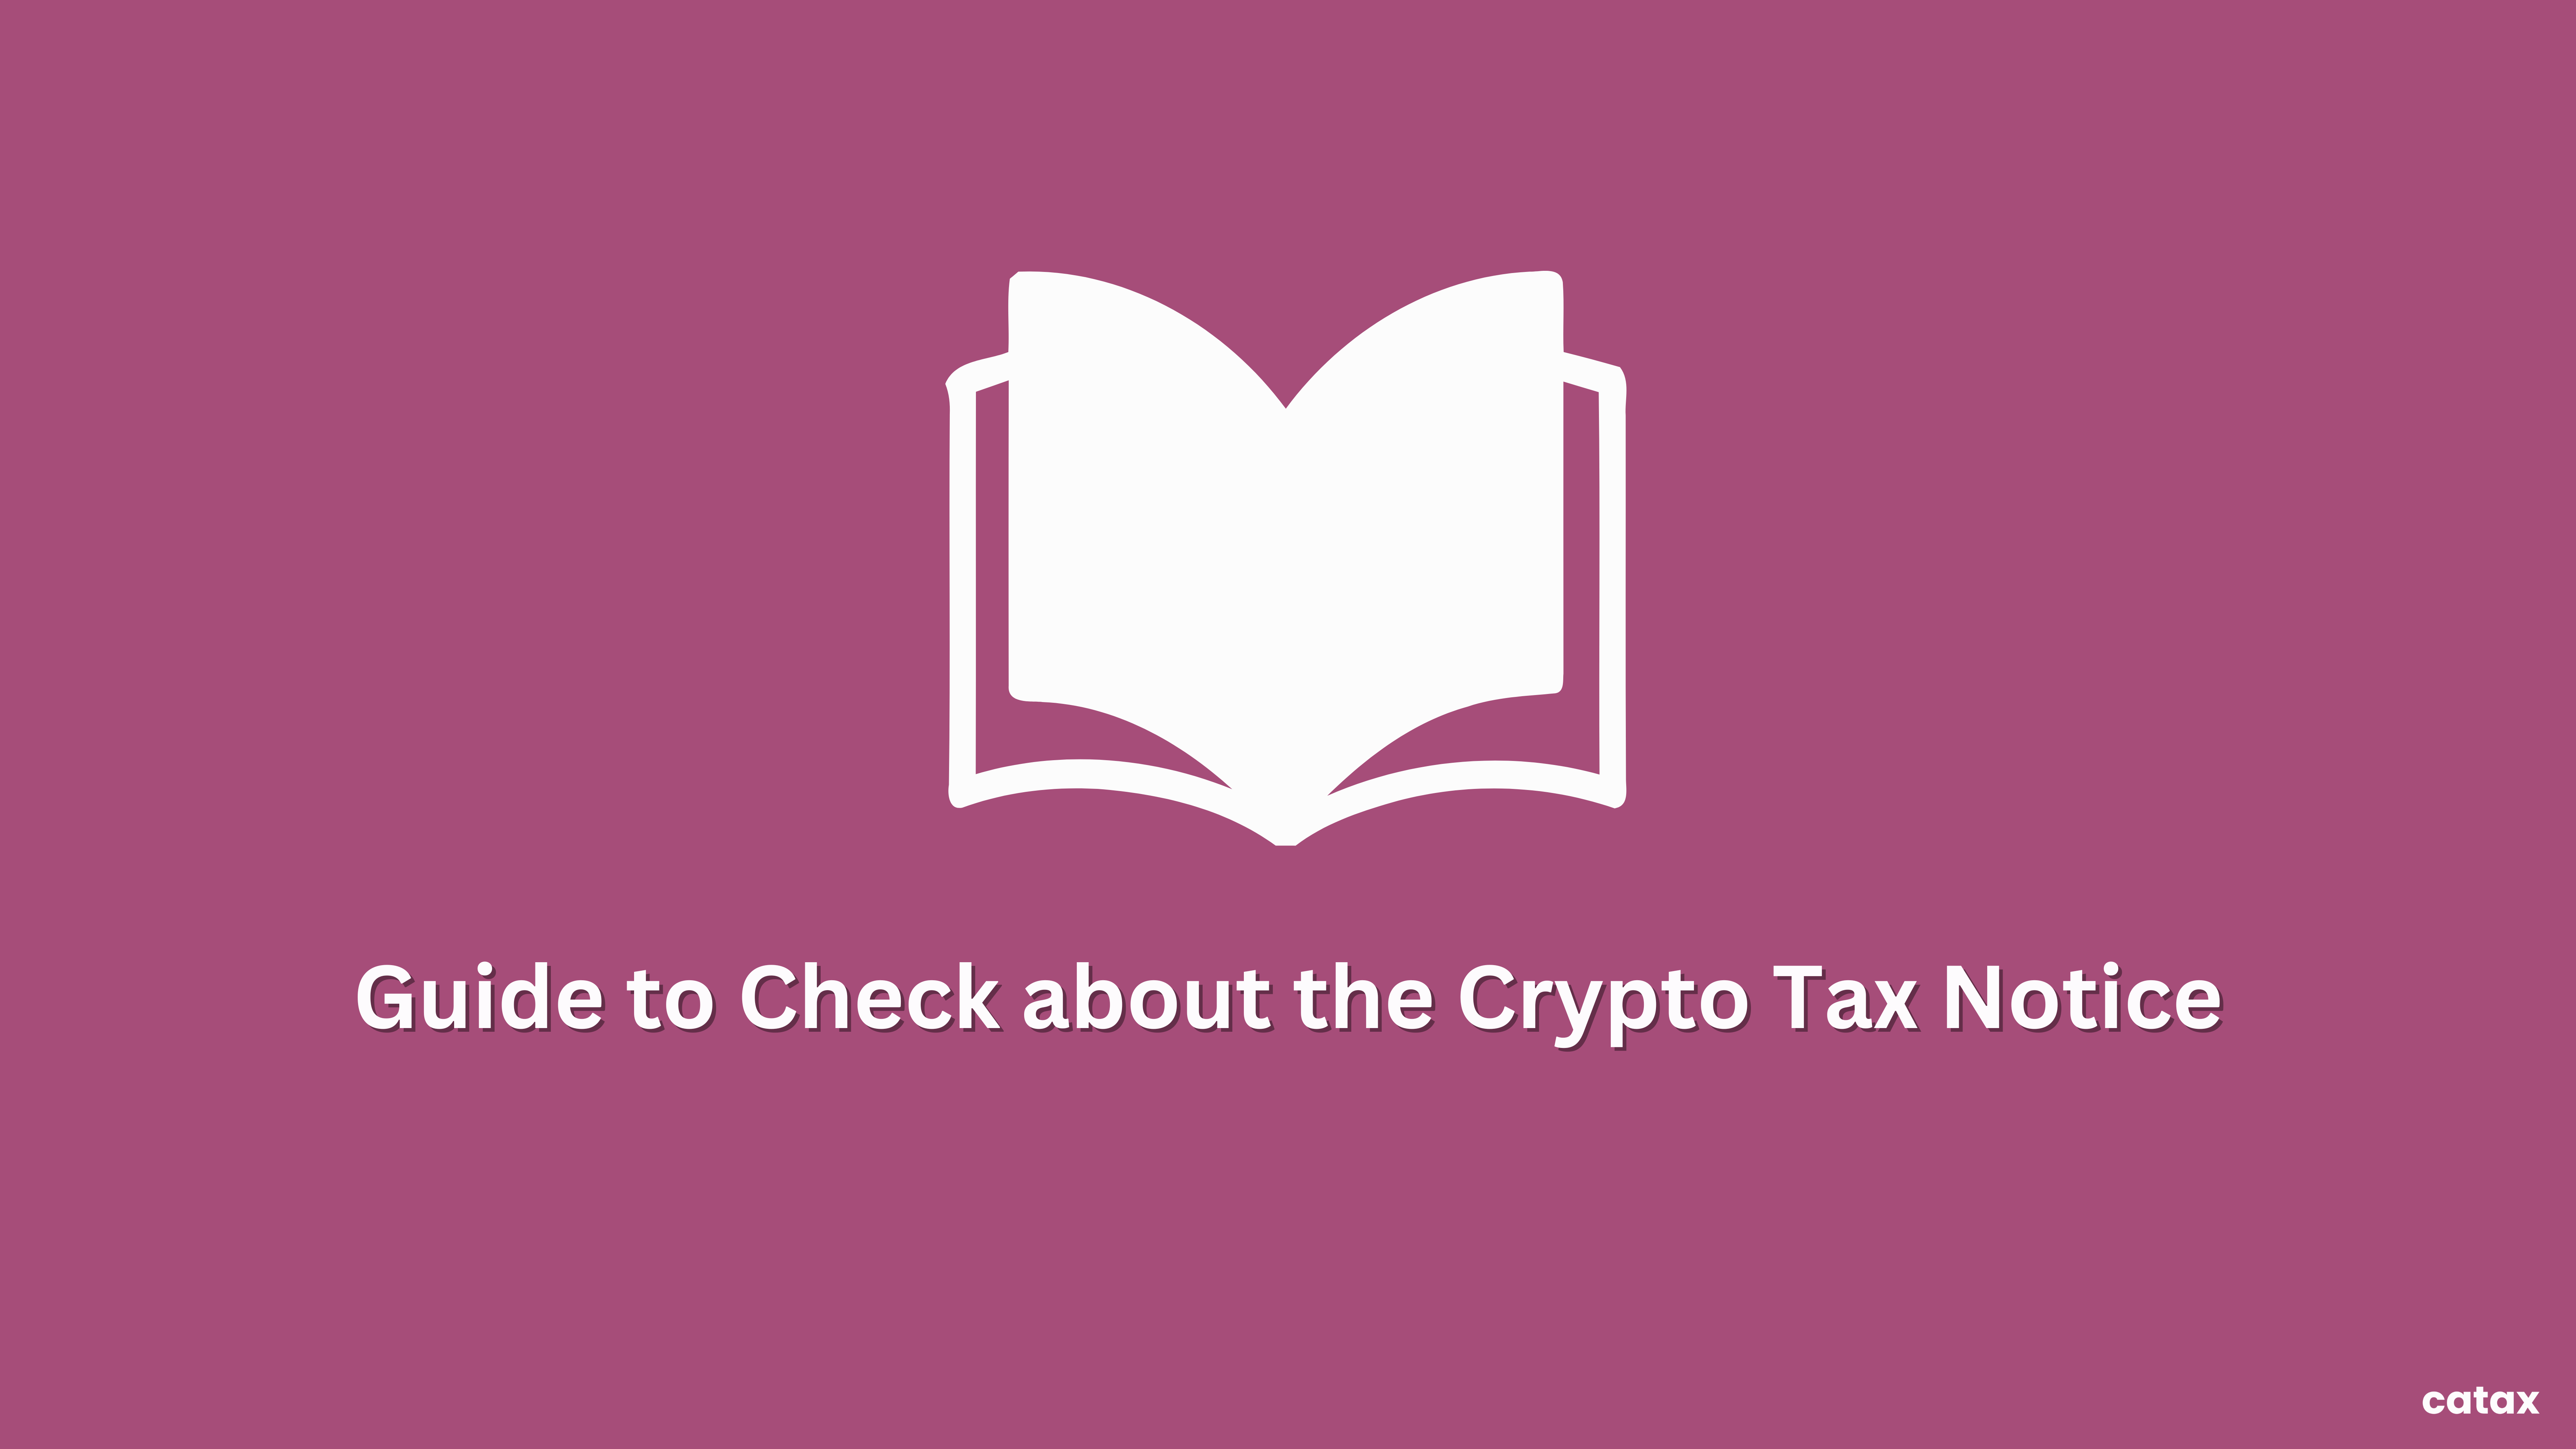 How to Check if You Have Received a Crypto Tax Notice?